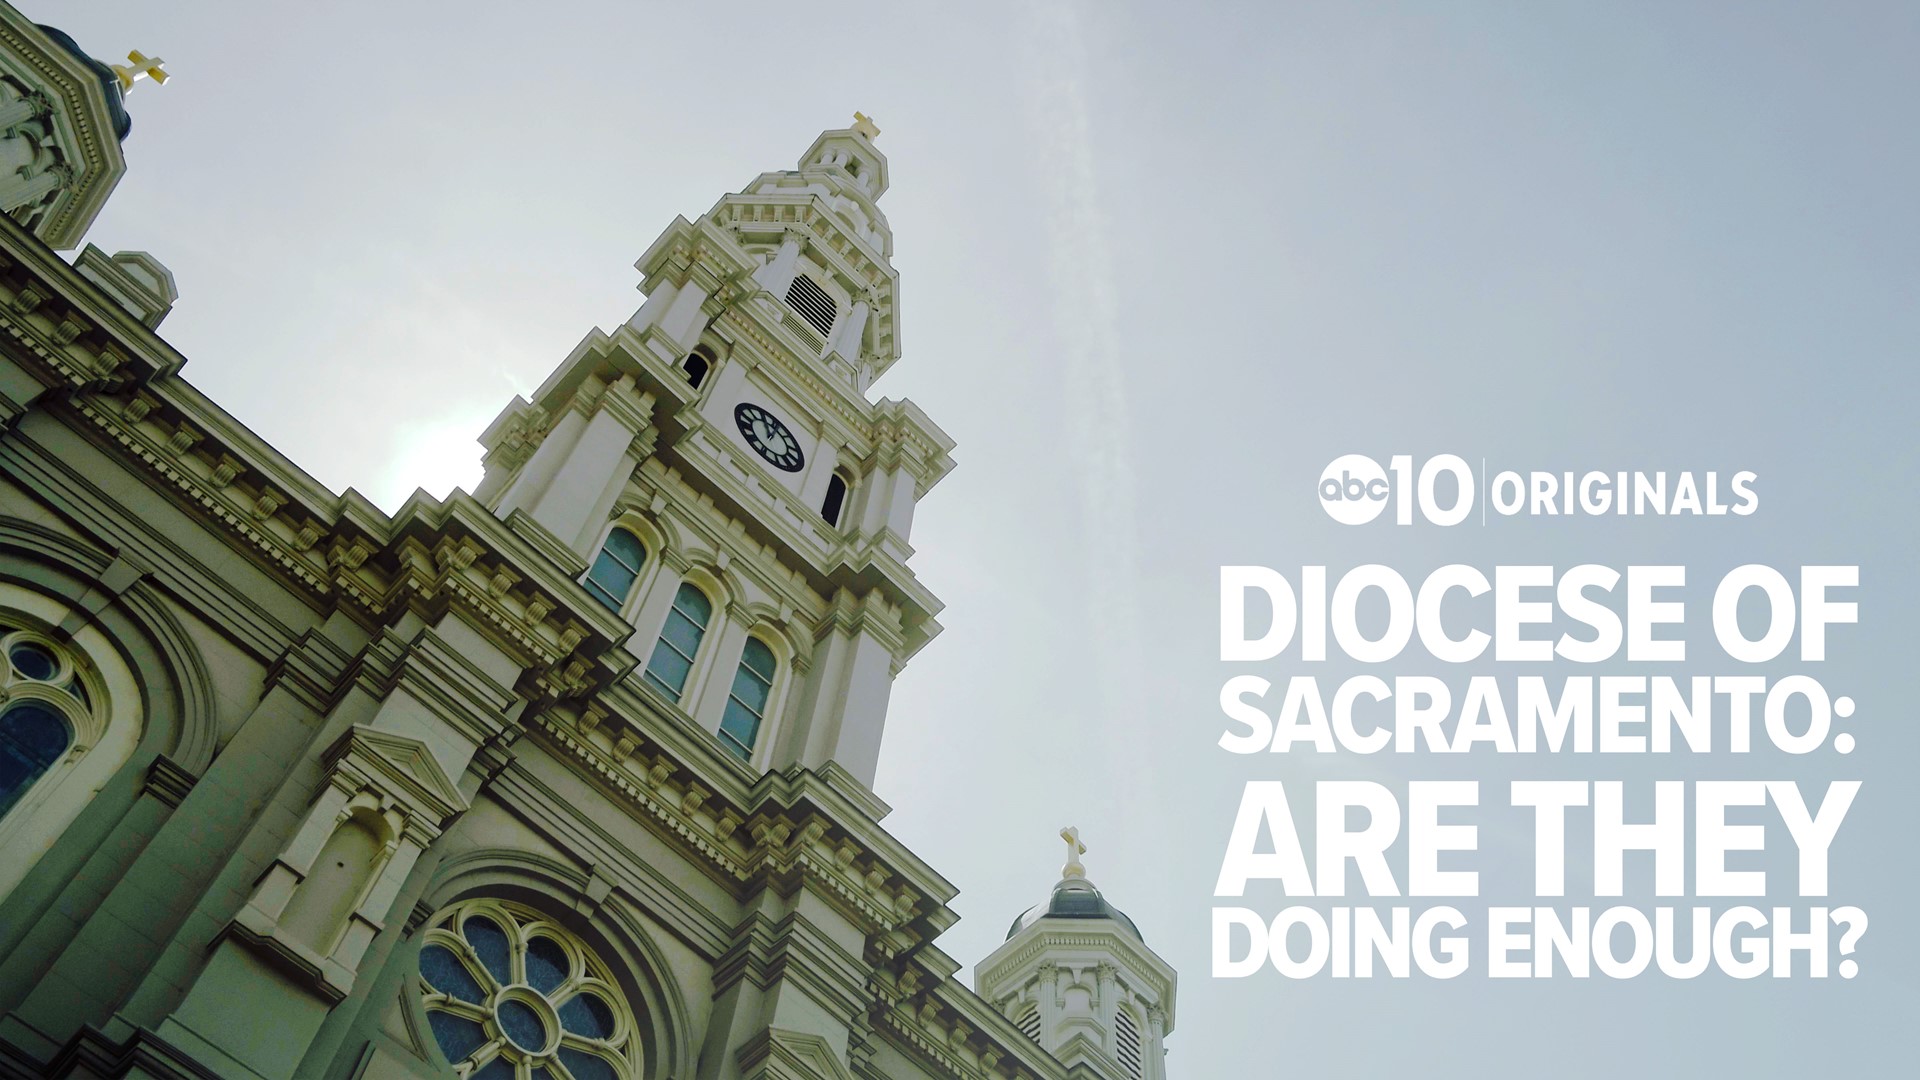 The Sacramento Diocese has made multiple announcements and public commitments in the past weeks, but many still seek comprehensive reform.